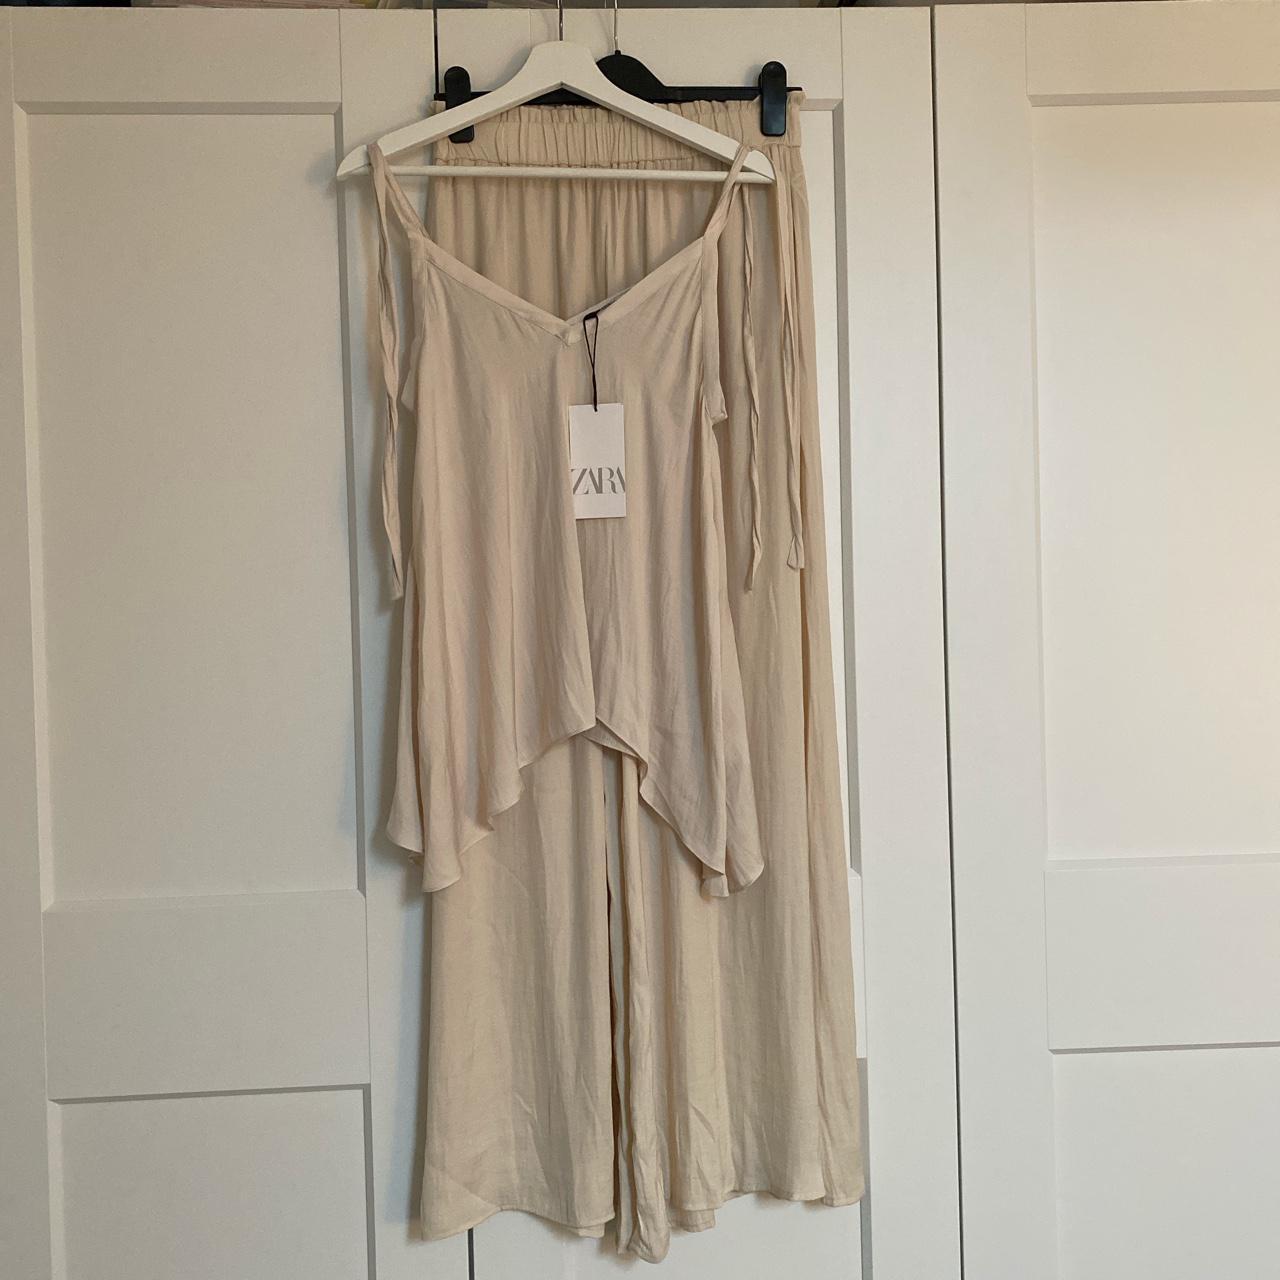 Product Image 1 - Zara coord. Never worn. Trouser